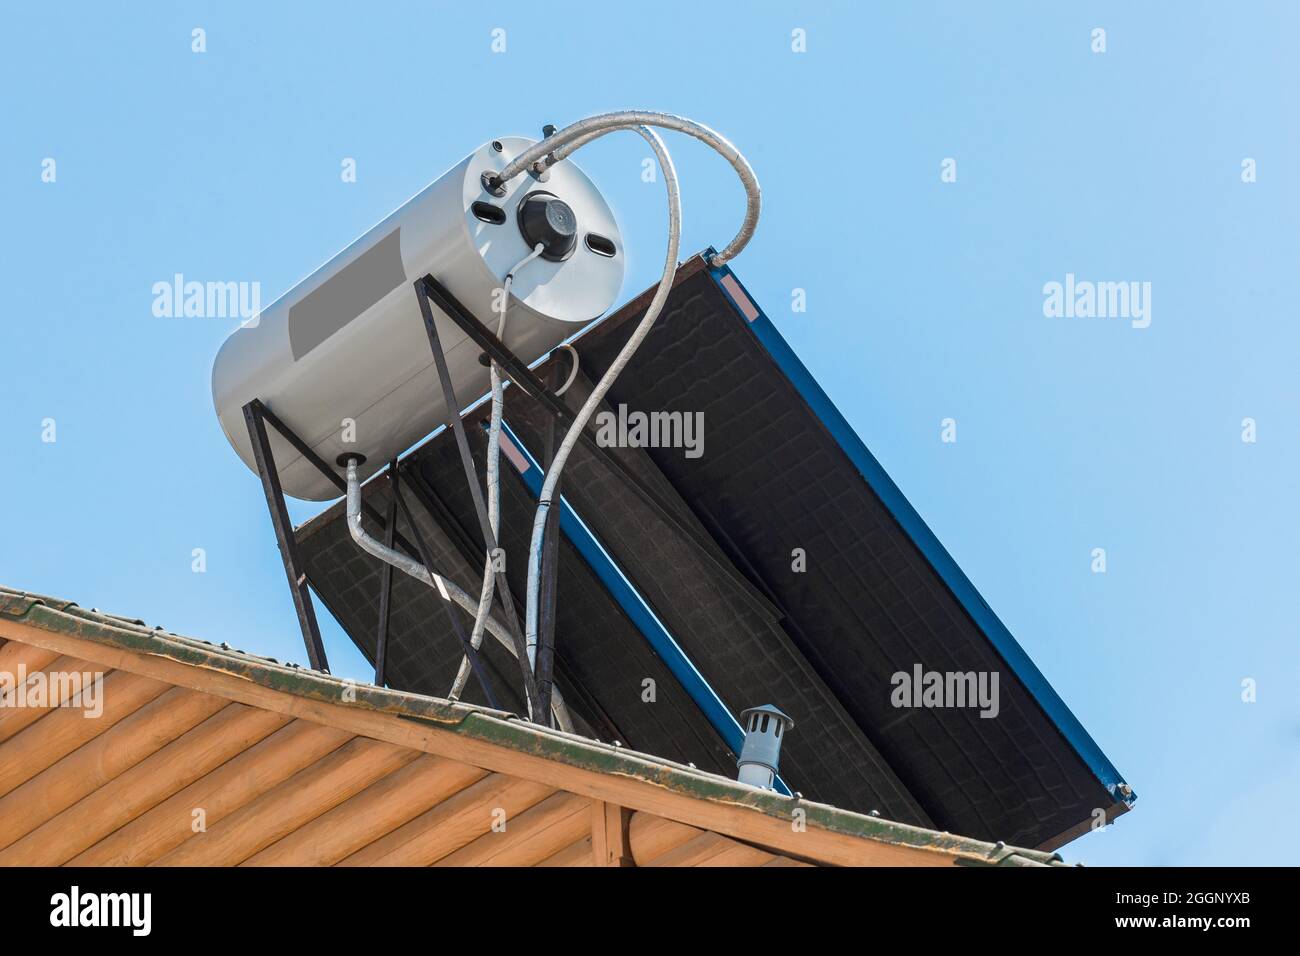 Solar panel energy and modern water heating technologies collector system on the roof of the building against the background of blue sky. Stock Photo